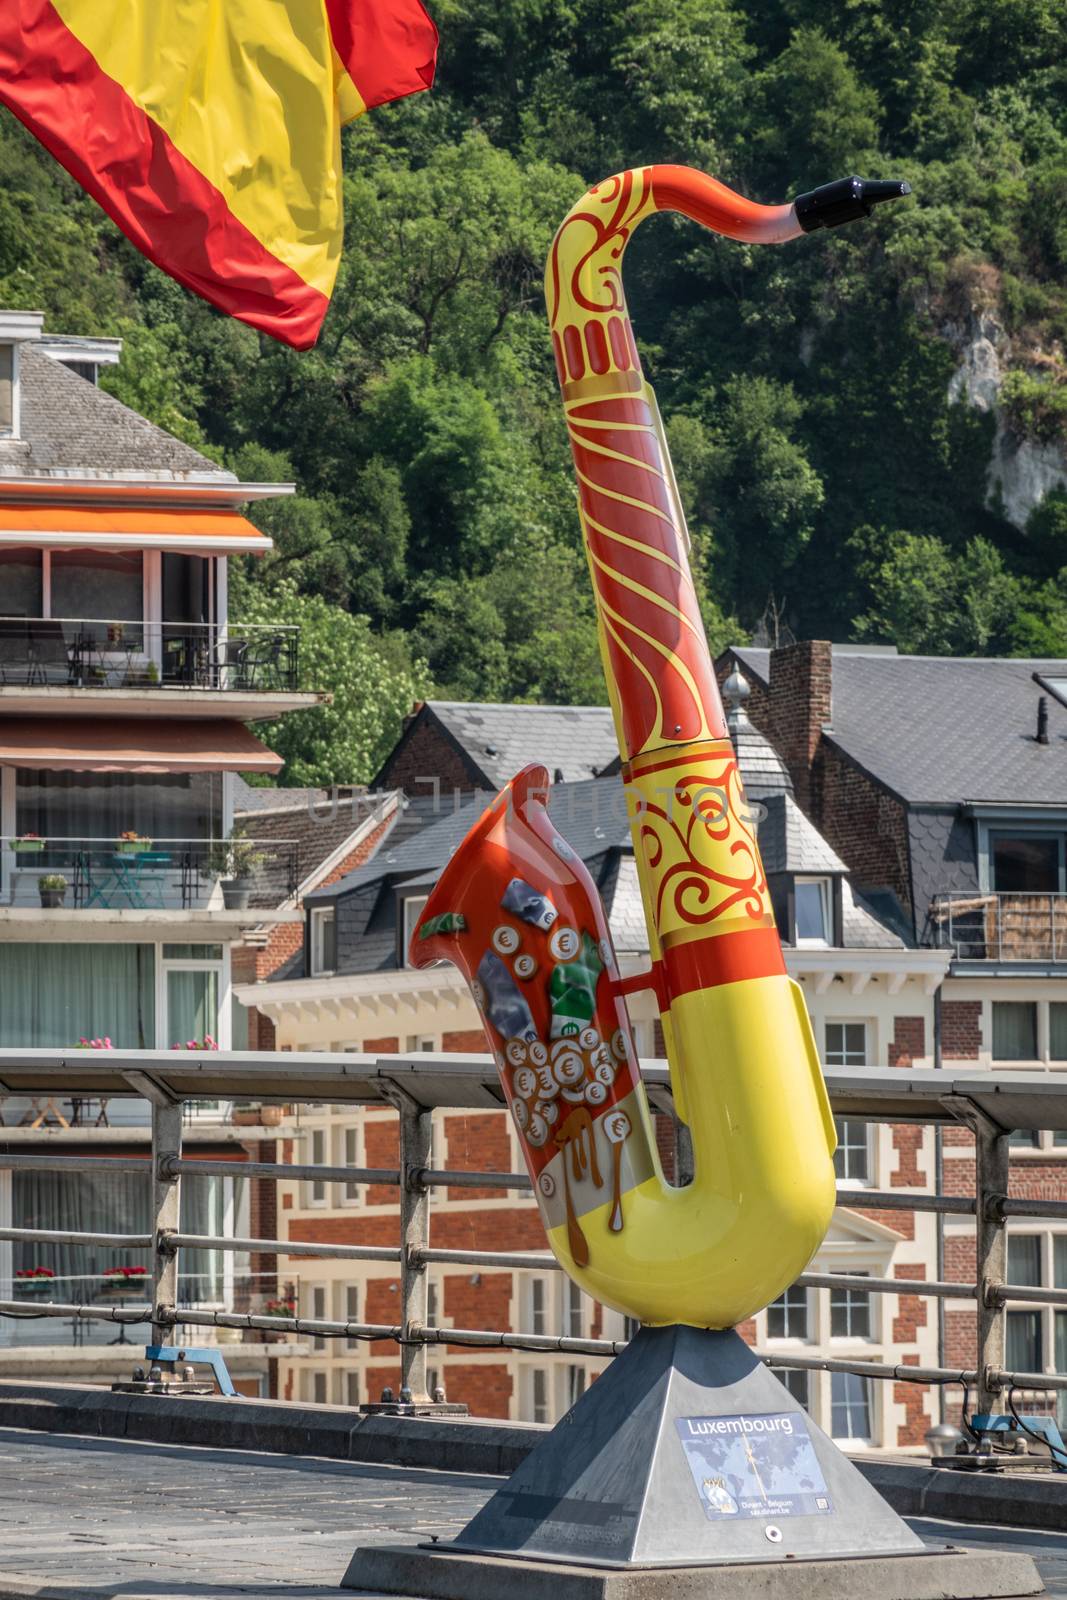 Dinant, Belgium - June 26, 2019: Red and yellow saxophone statue to honor Luxemburg on Charles de Gaulle bridge. Business and houses in back.